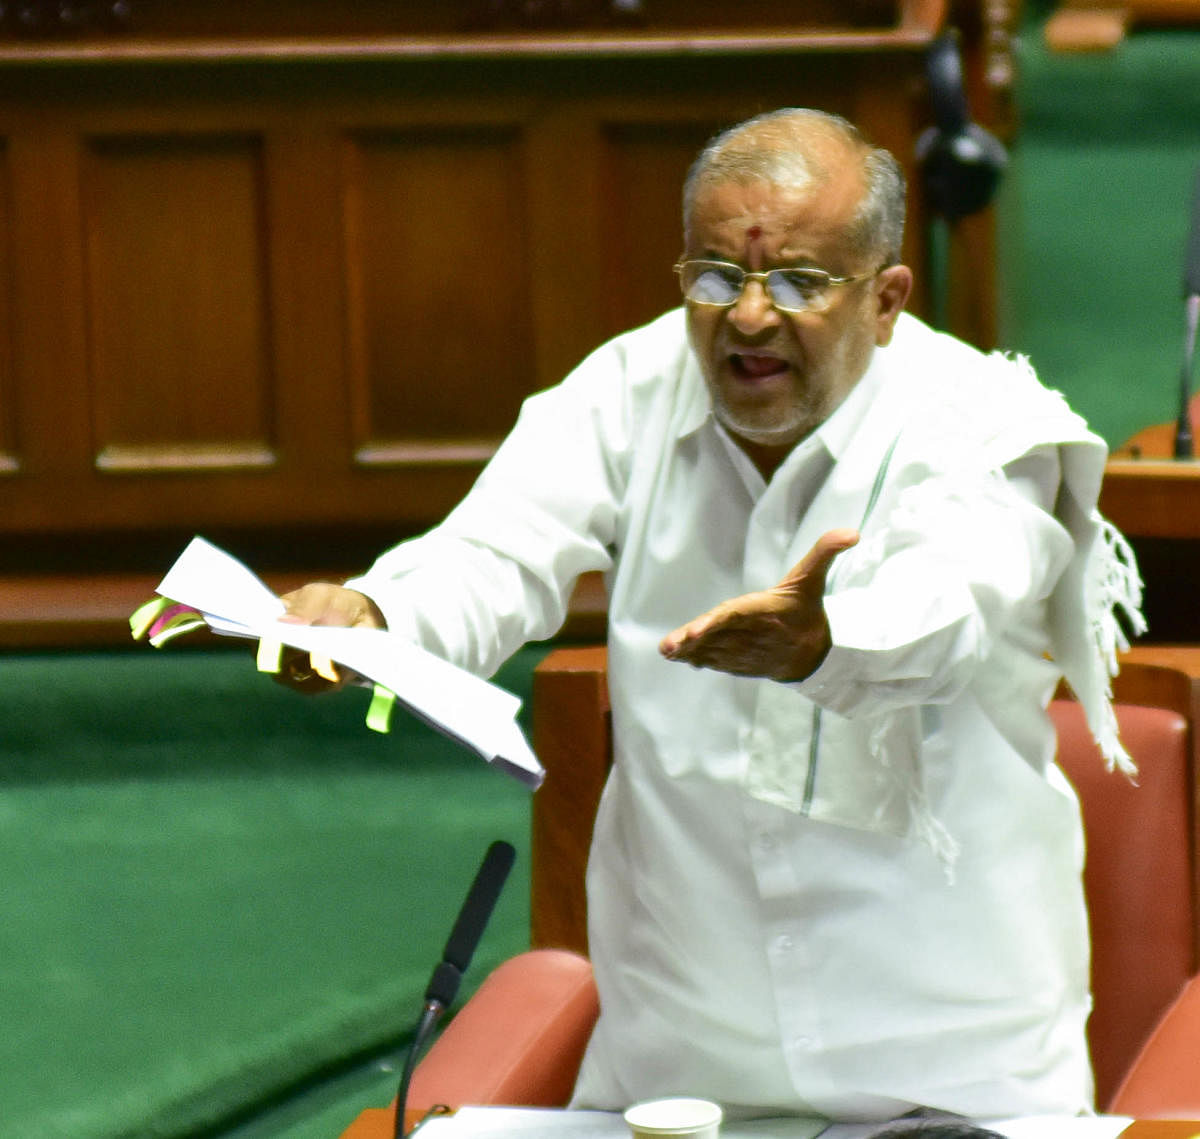 Higher Education Minister G T Devegowda informed the Council that guest lecturers working in first grade colleges had been given five years of age relaxation that would help them apply for the vacant posts of lecturers in government colleges.